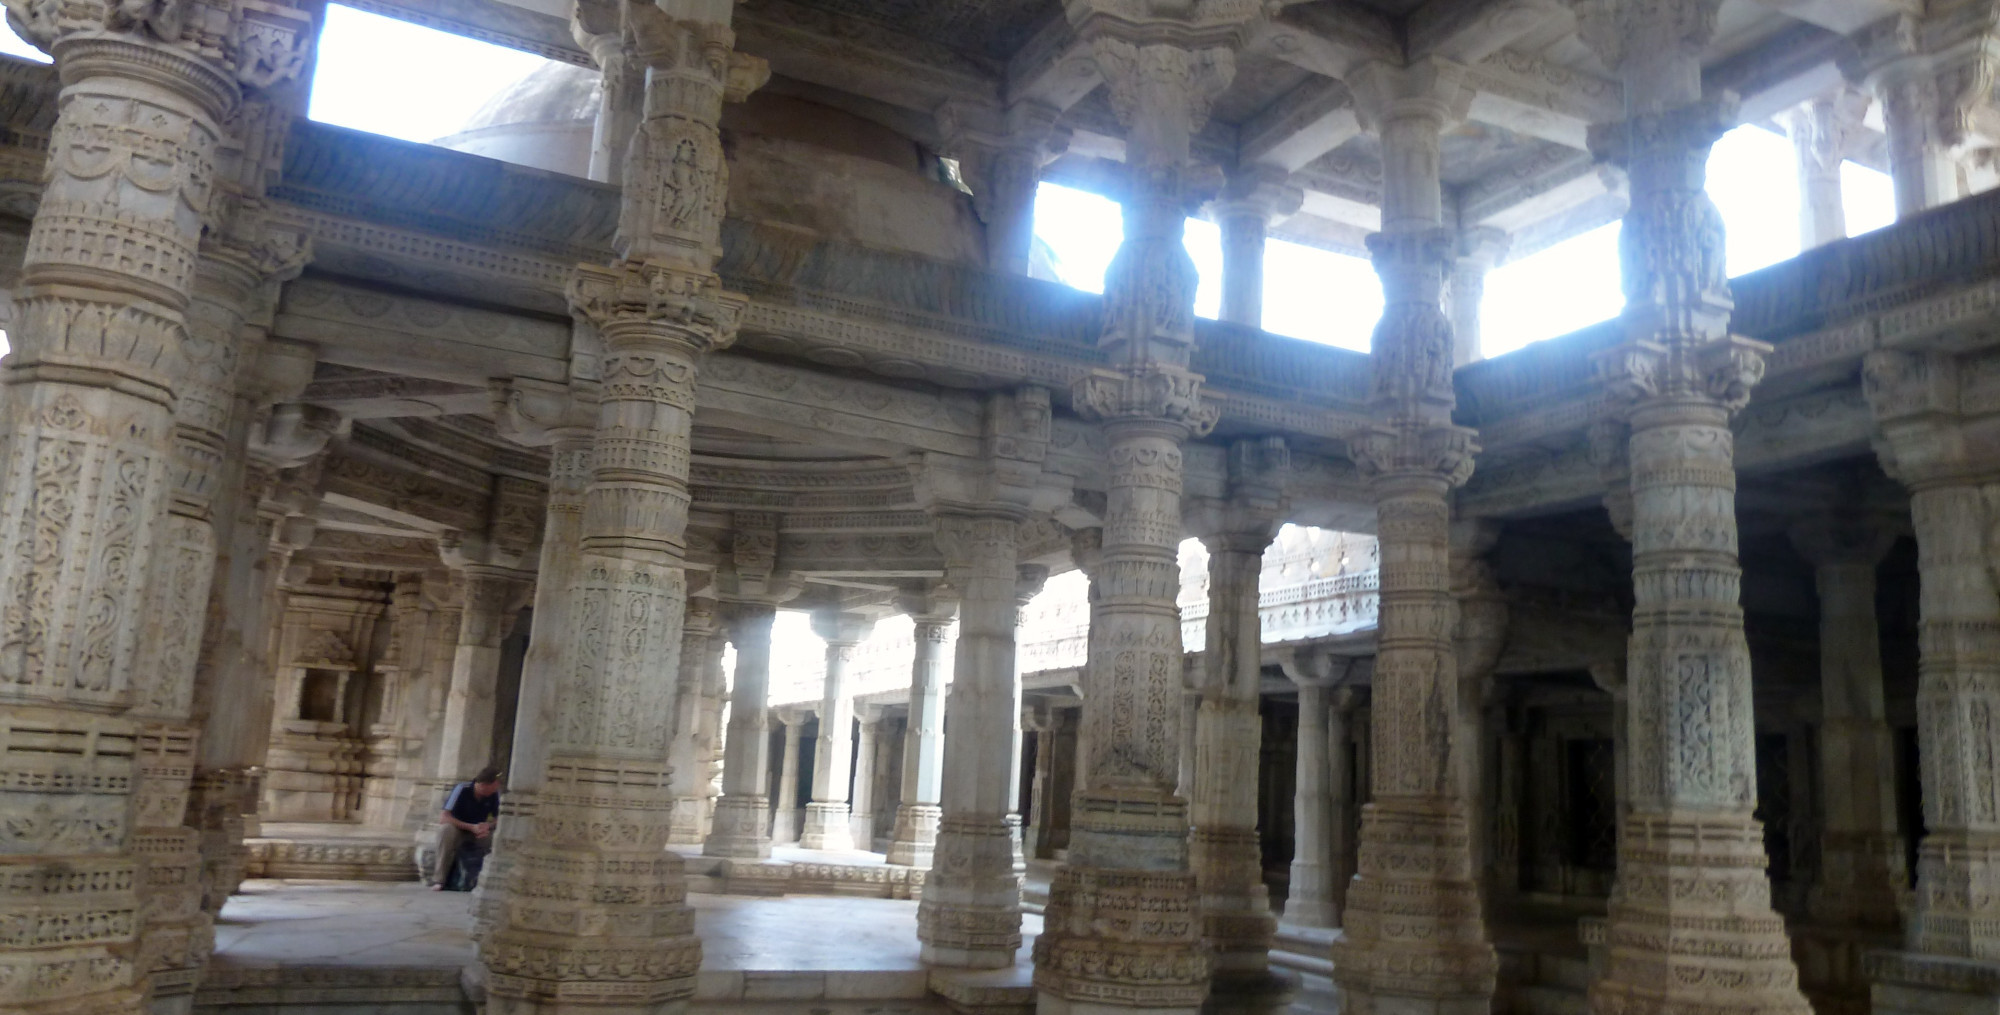 Some of the 1400 pillers of Chaumukha Jain Temple